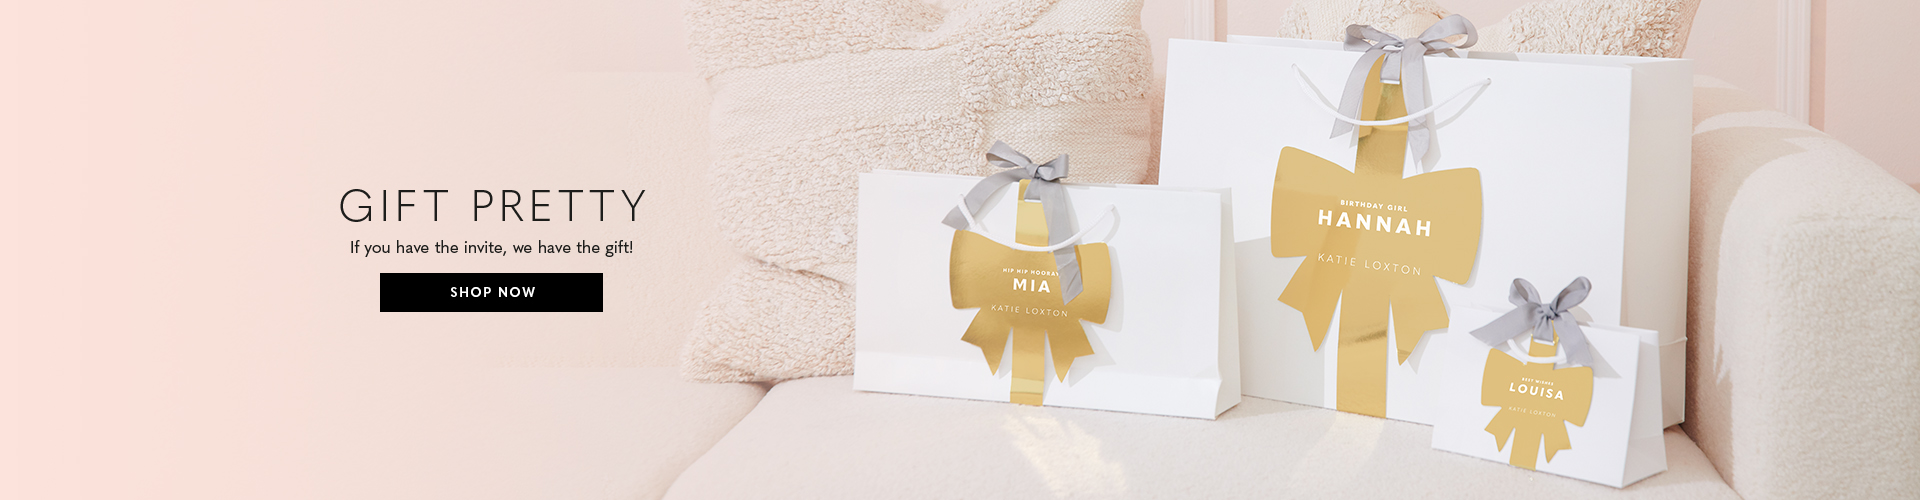 Katie Loxton Personalised Gold Bow Gift Bags